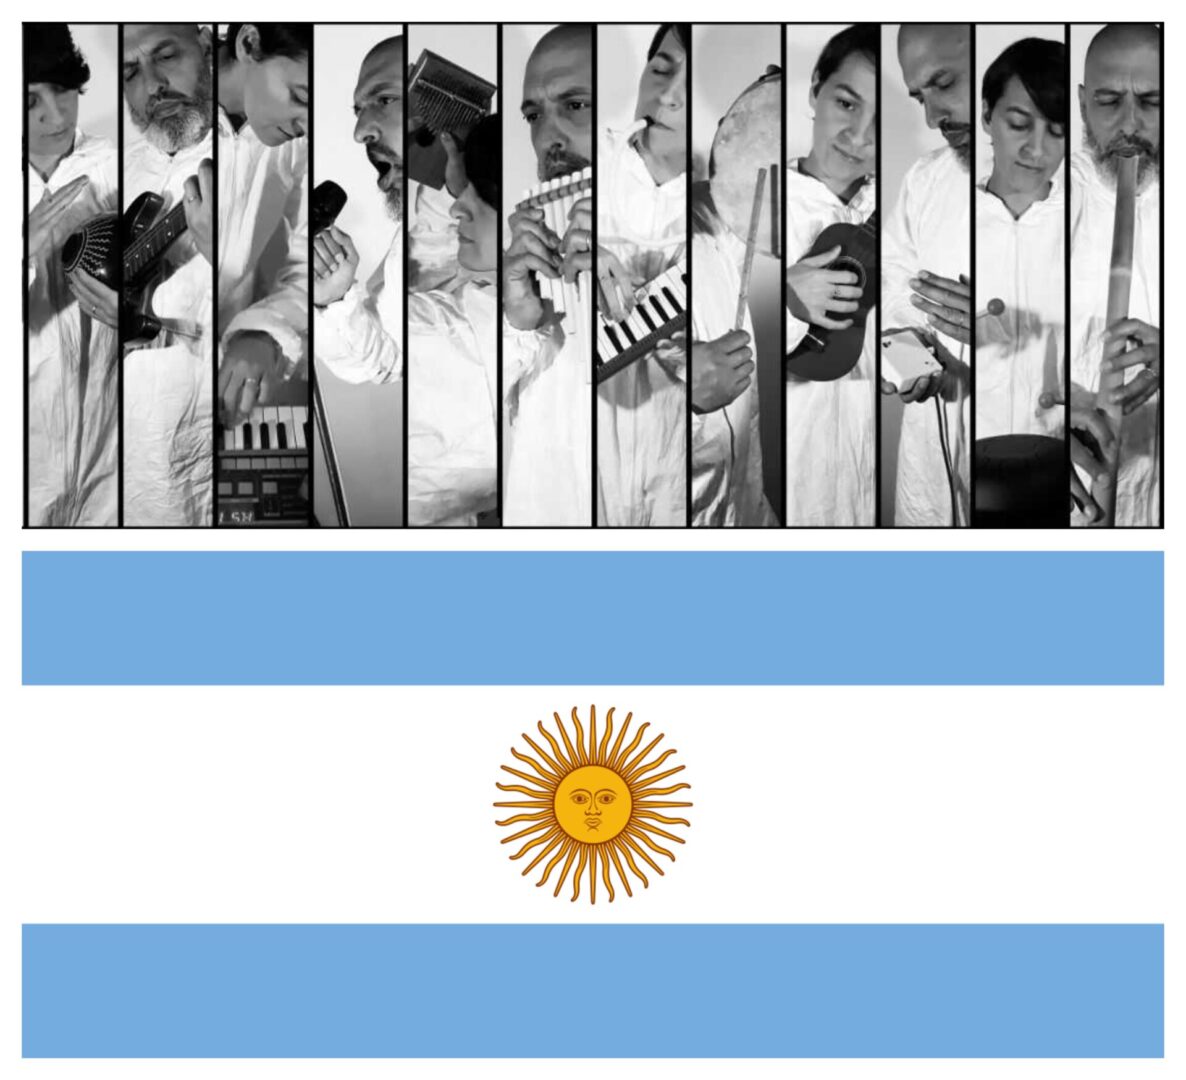 A photo collage of performers and a flag of Argentina